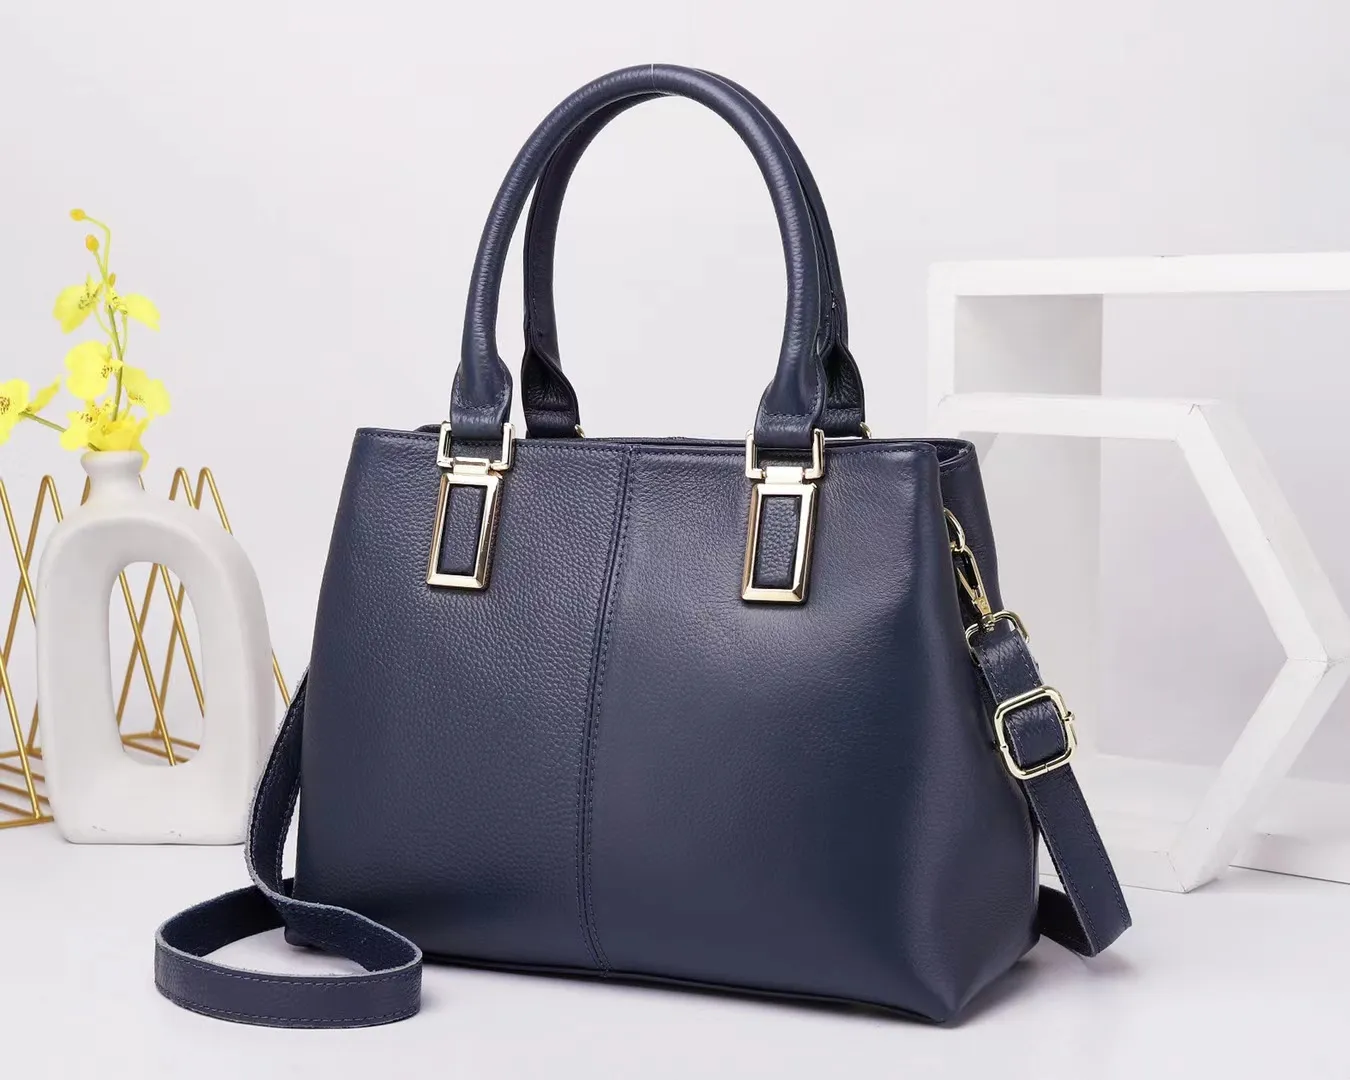 HBP Simple handbag classic shoulder bag for young fashion girl tote Top cowhide Boston